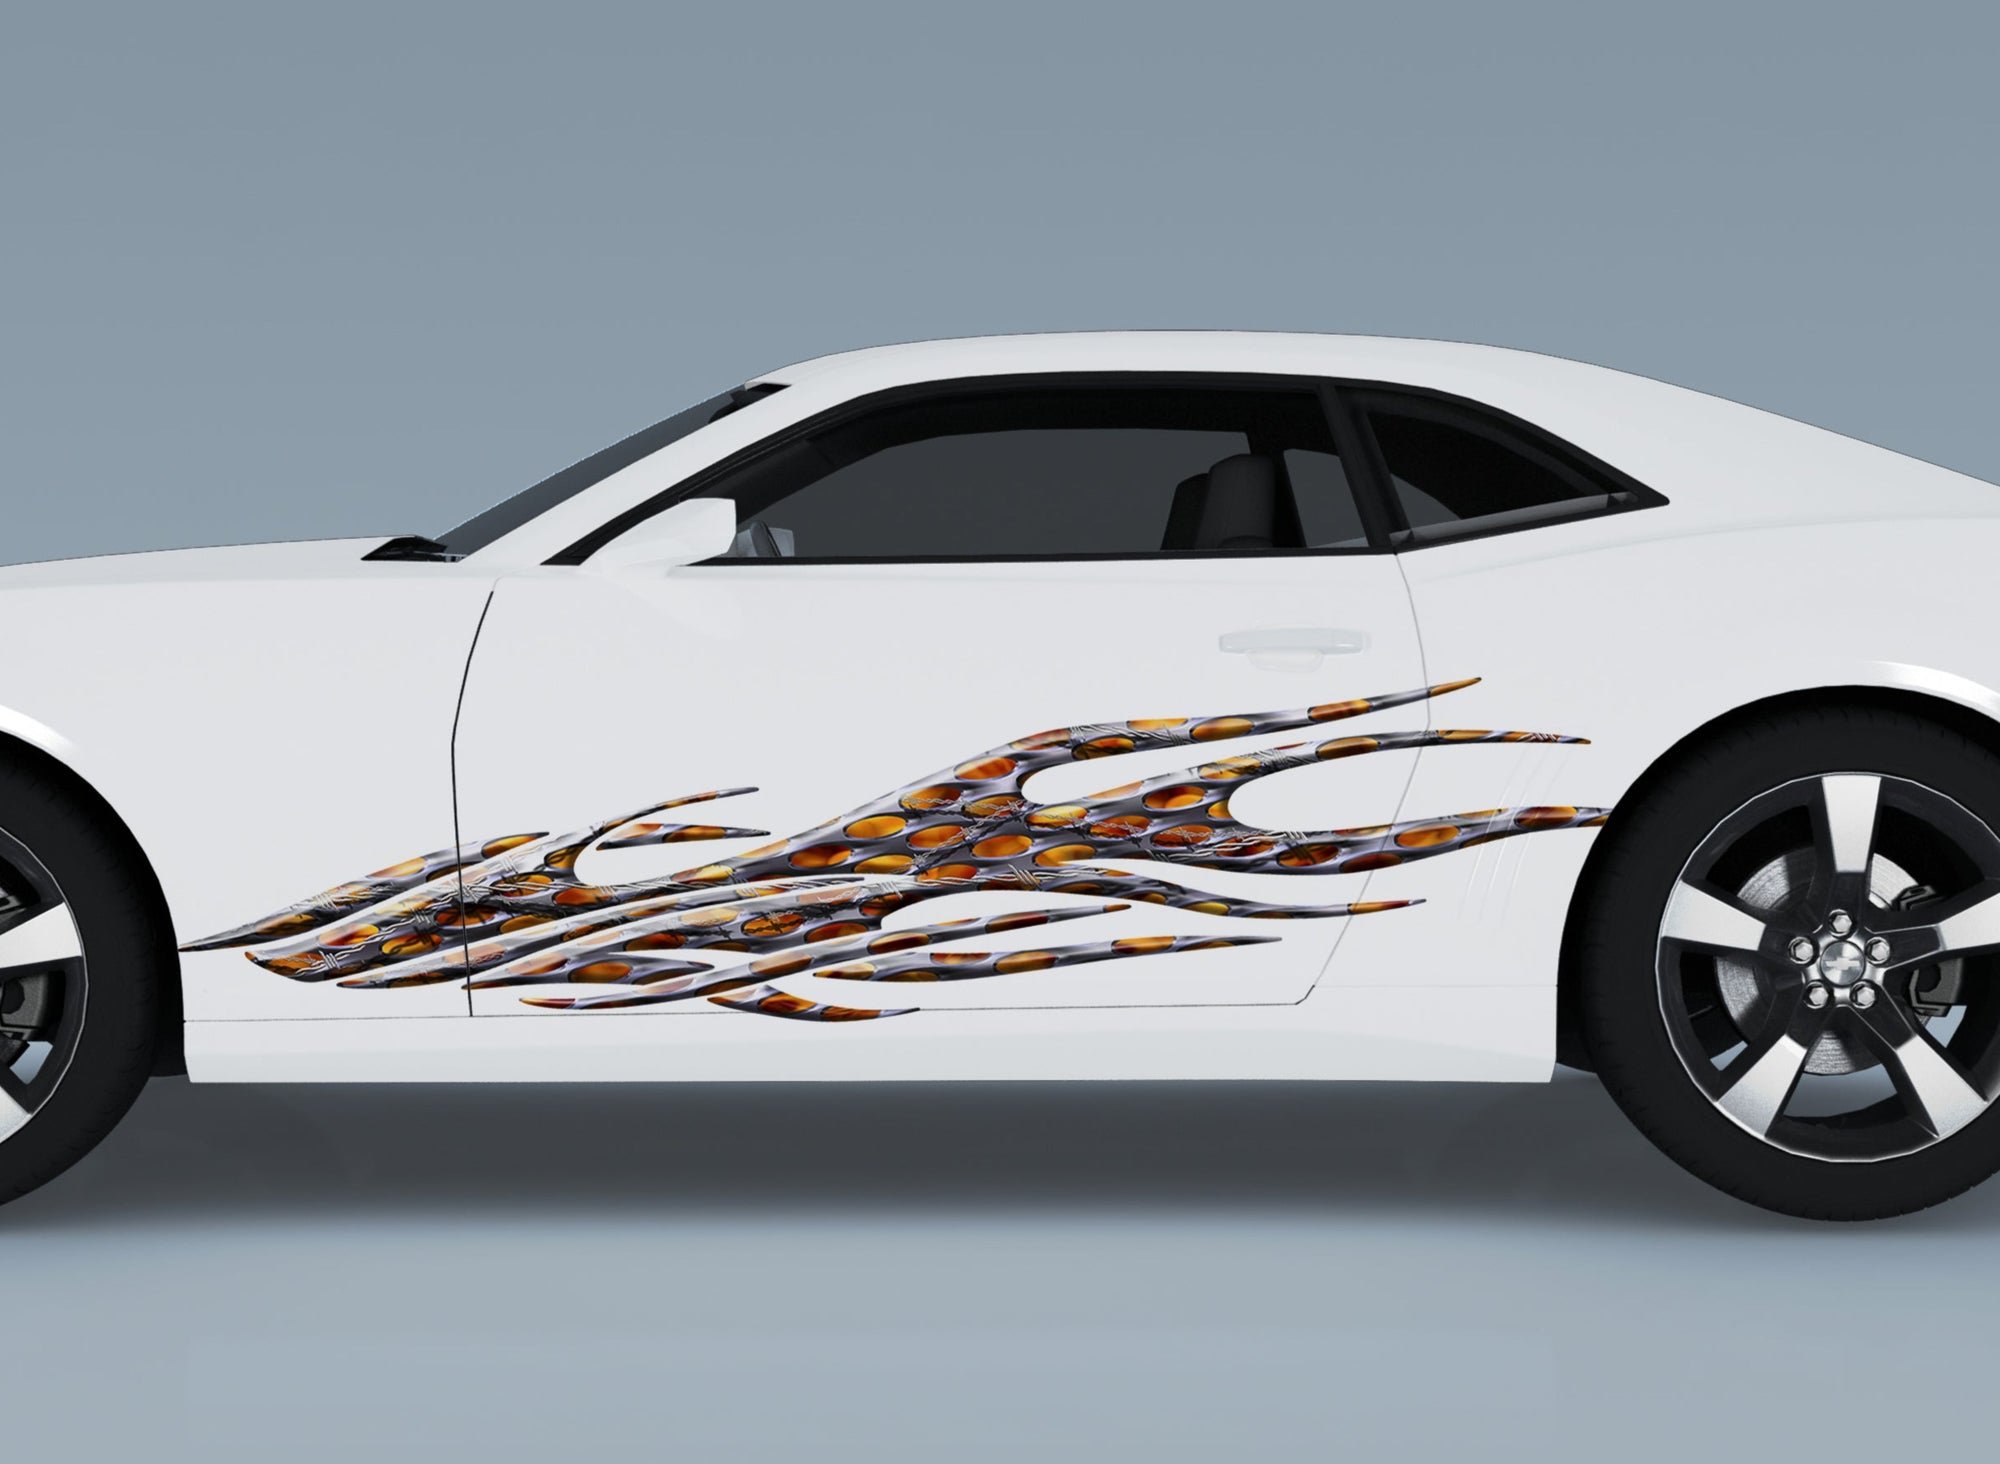 barbwire flames vinyl graphics on the side of white mustang sports car 